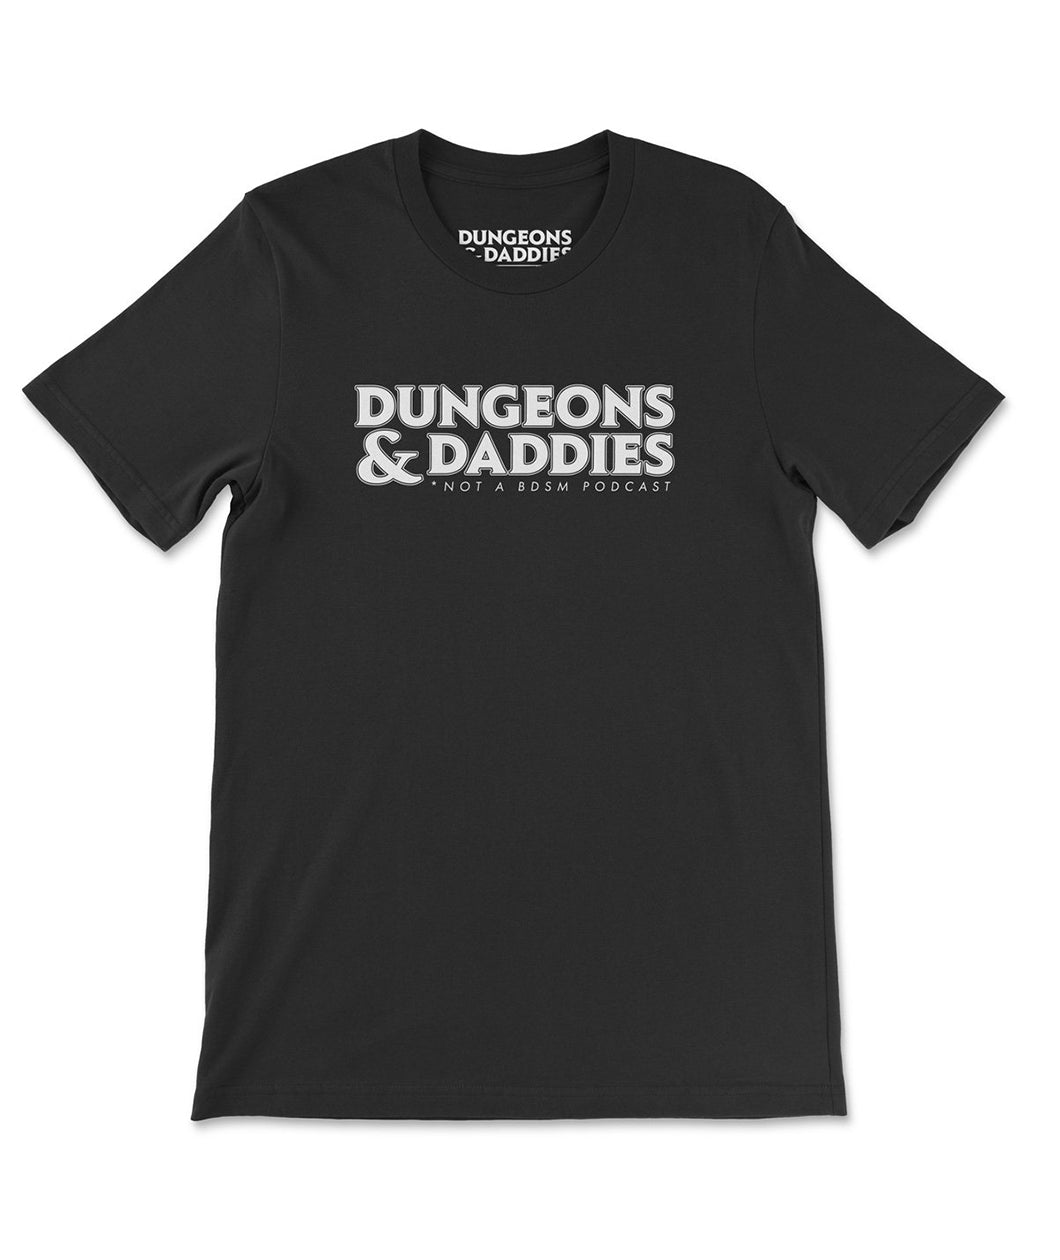 Black T-shirt with white printed Dungeons & Daddies logo. NOT A BDSM PODCAST is printed very small in thin white text under the logo